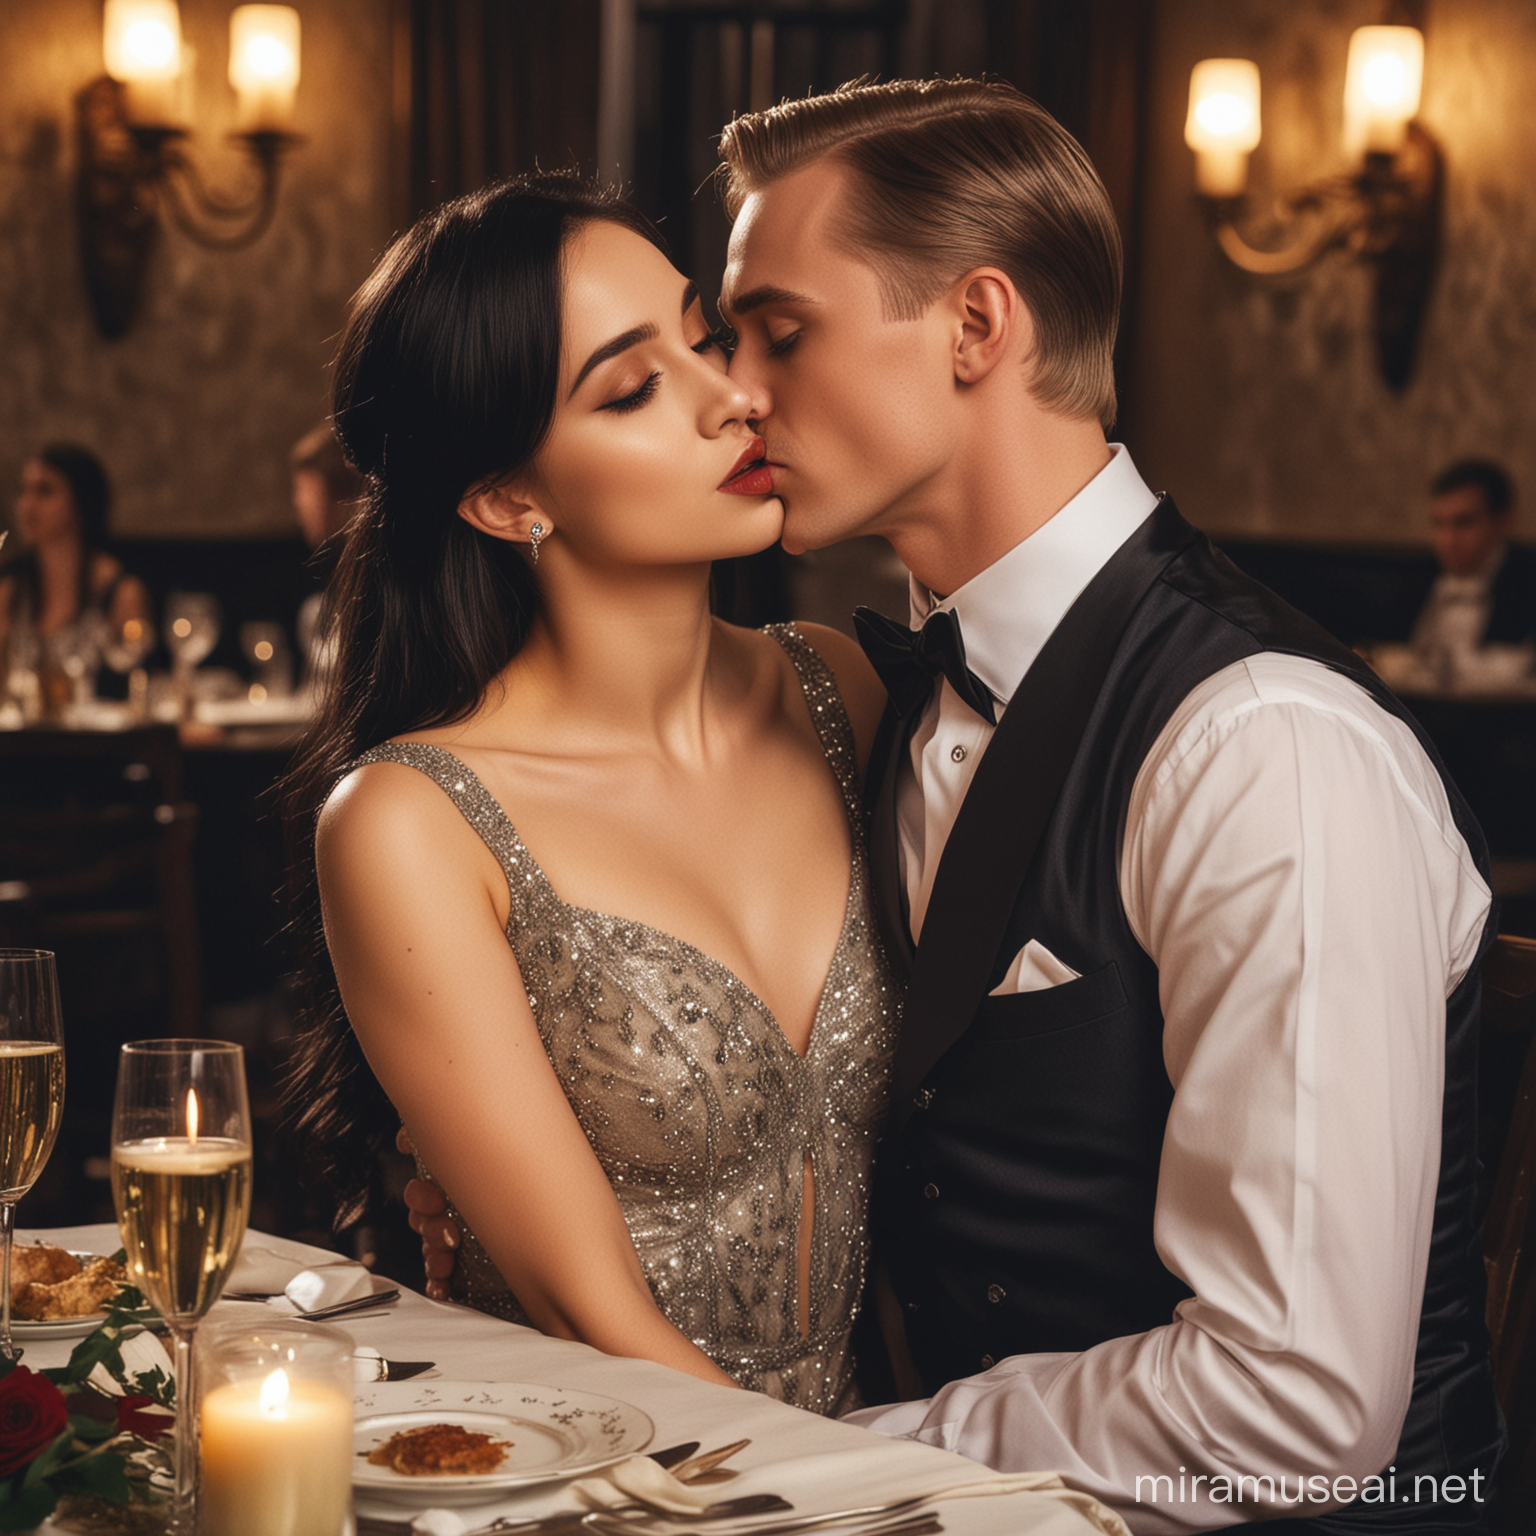 a beautiful girl with dark hair in a beautiful expensive evening dress at the table kisses Draco Malfoy on the cheek in a tuxedo,dinner, evening, restaurant